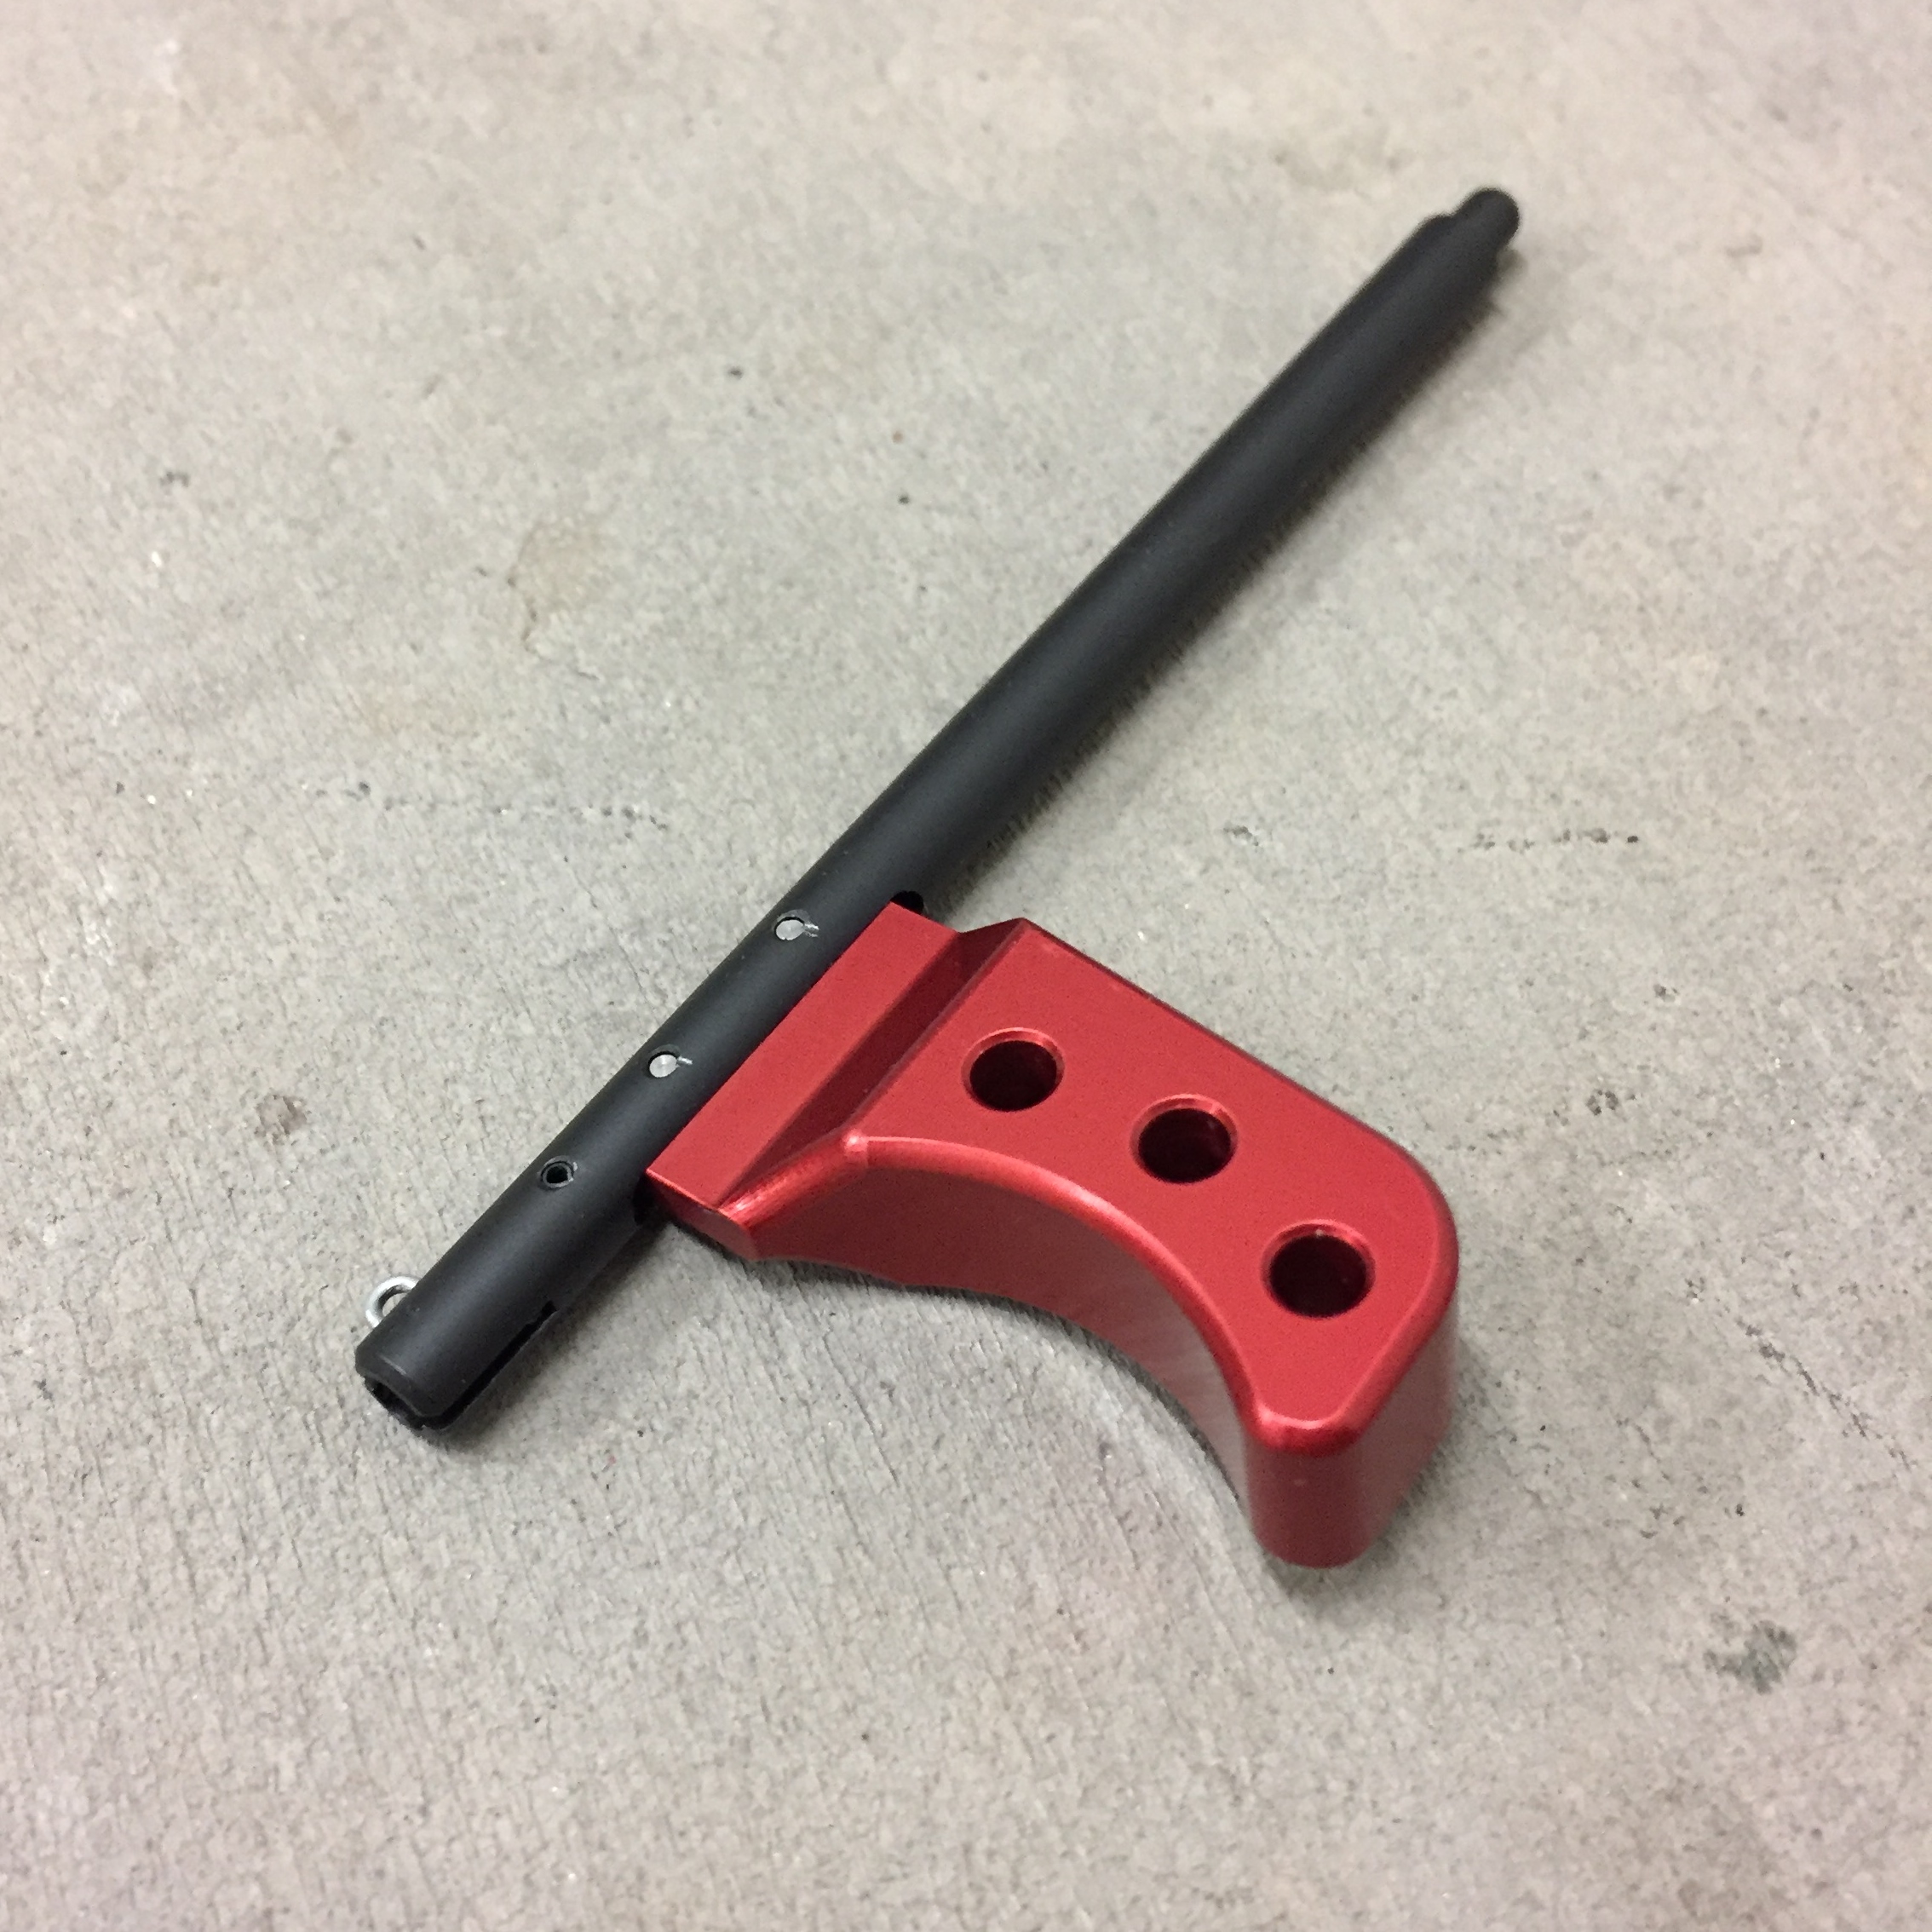 HB Industries CZ Scorpion EVO 3 Theta Extended Charging Handle (Red or Black) - Red